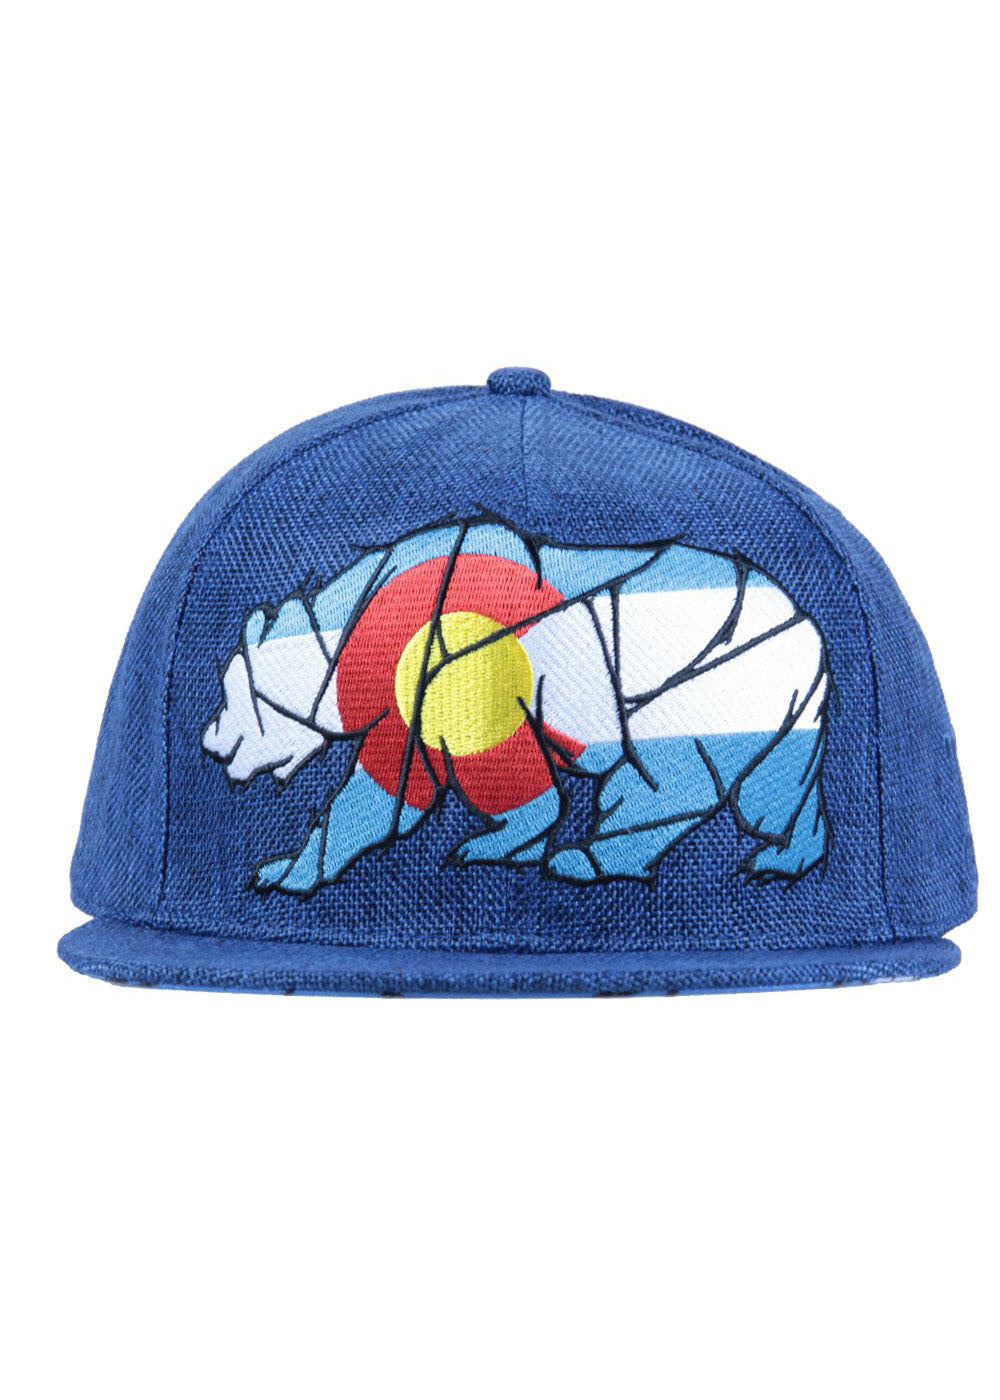 Grassroots Colorado Mosaic Bear Fitted Hat